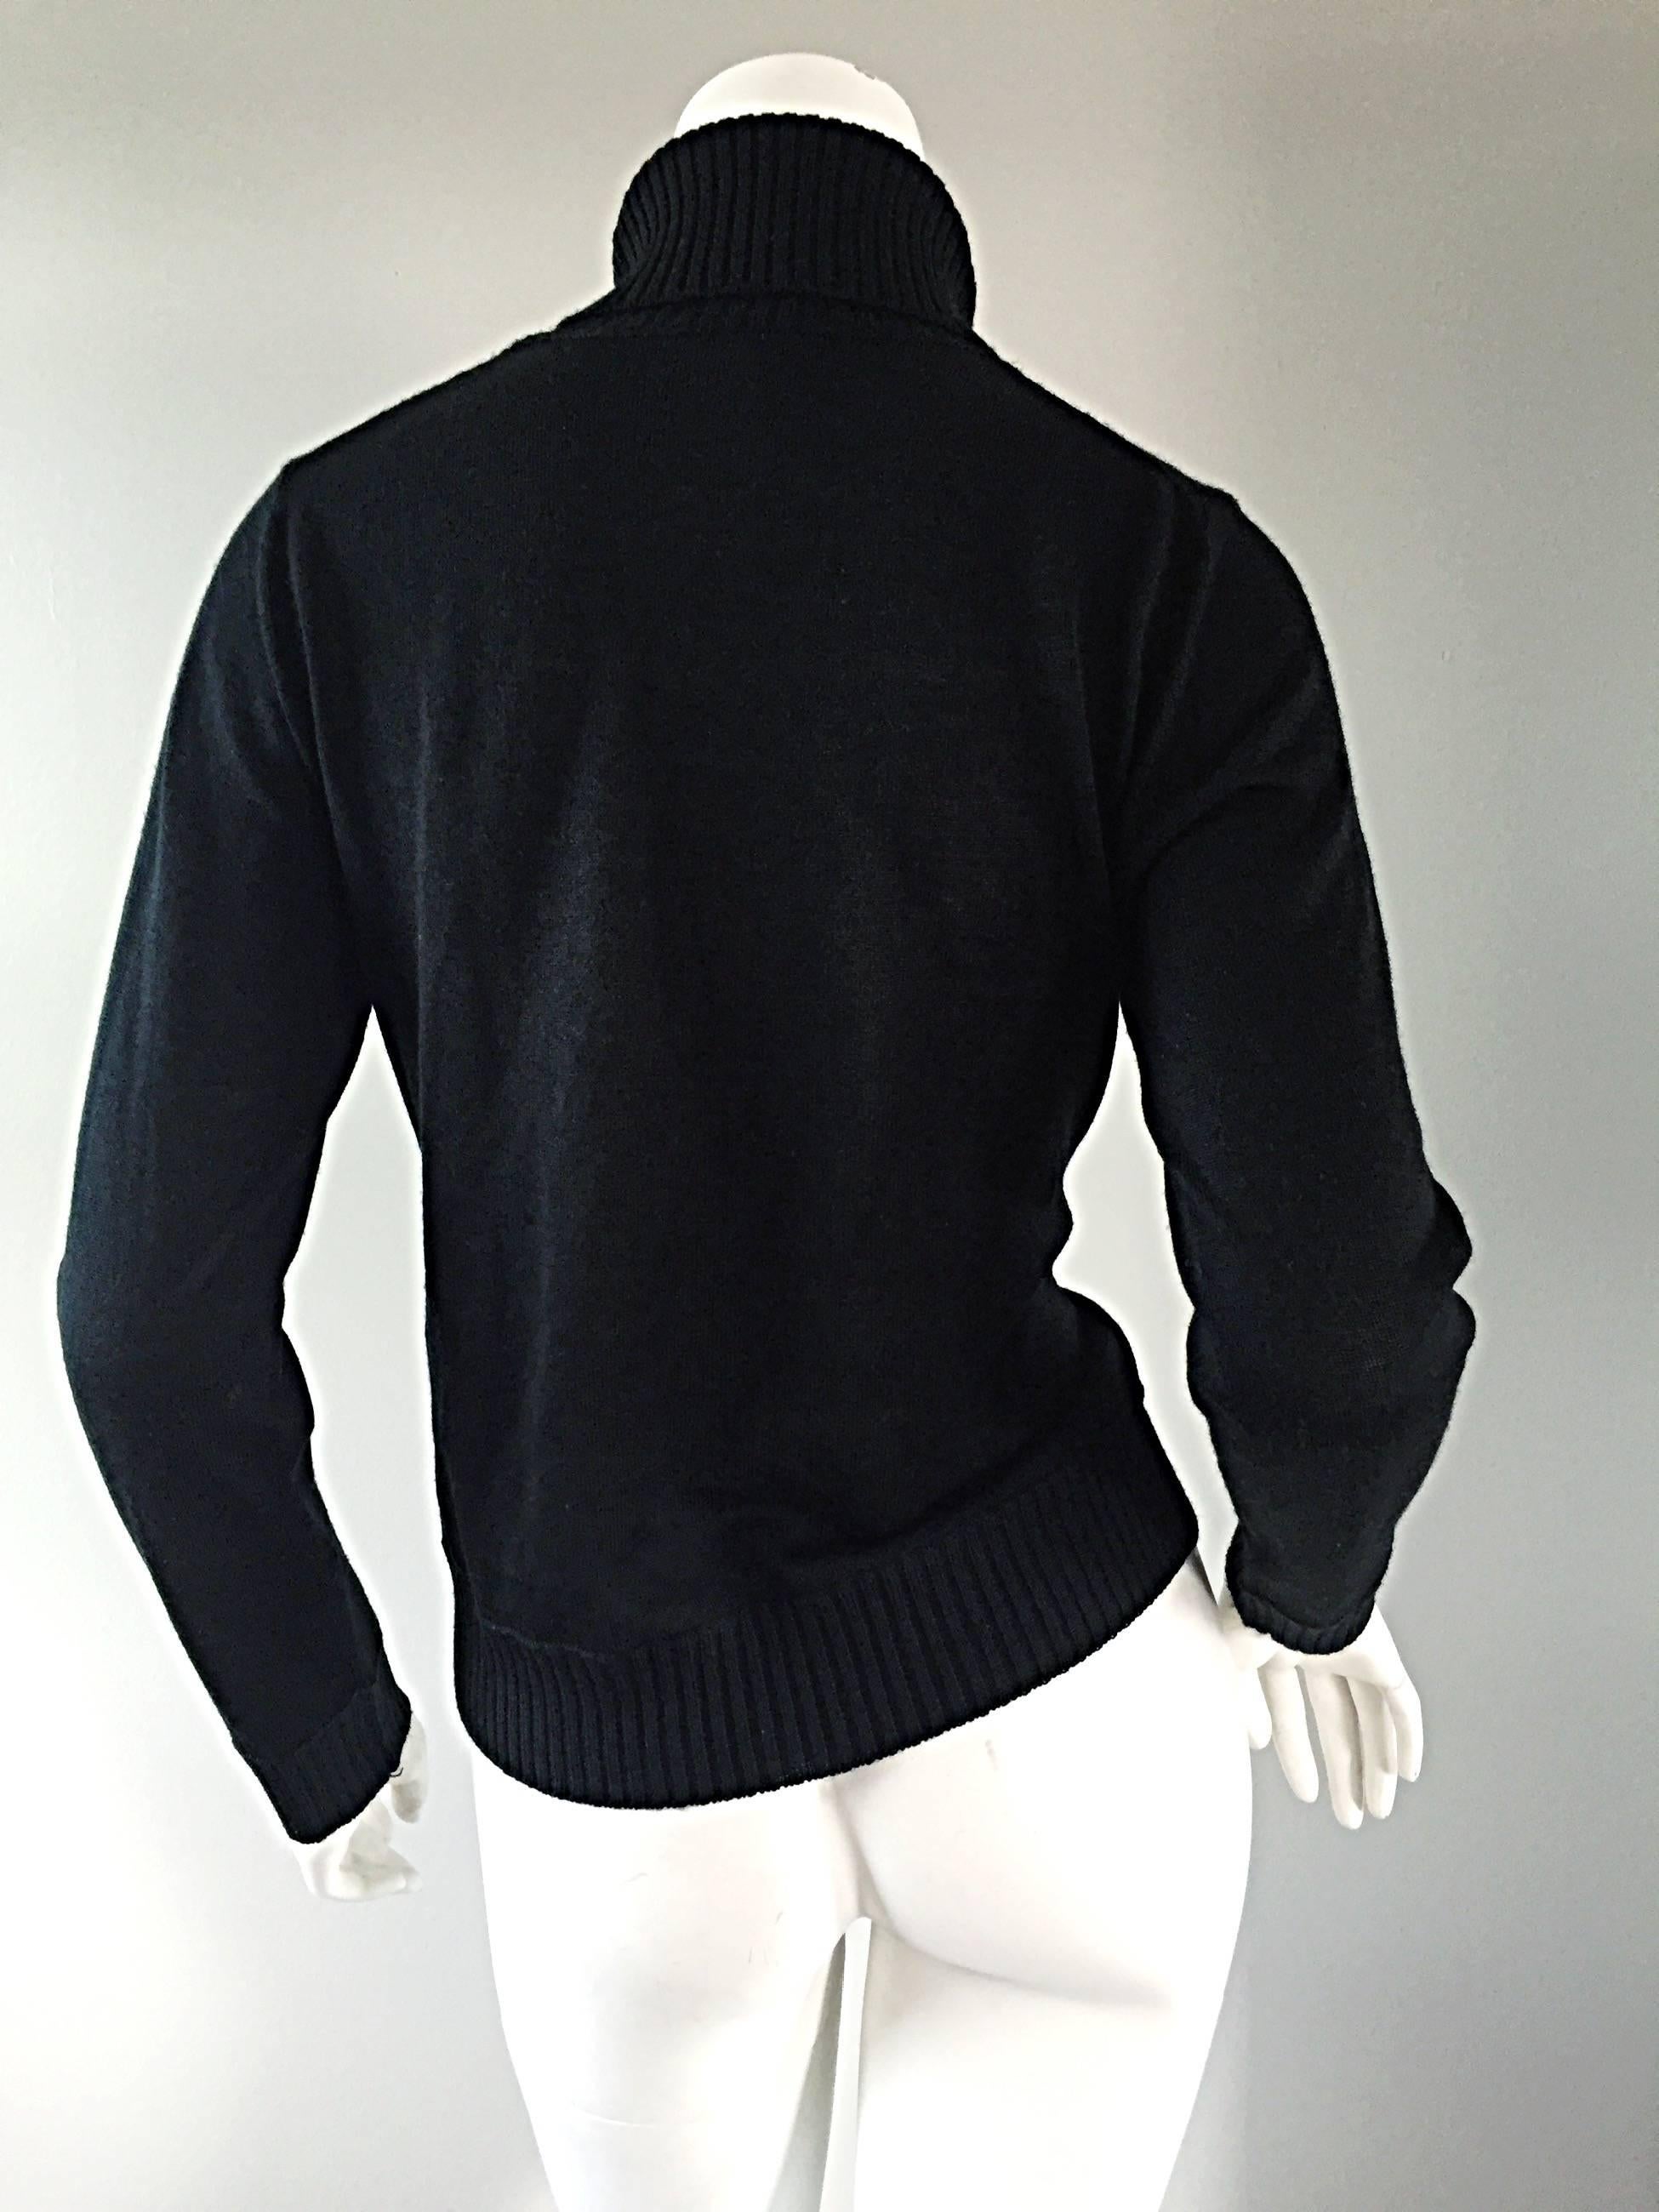 fitted black turtleneck sweater